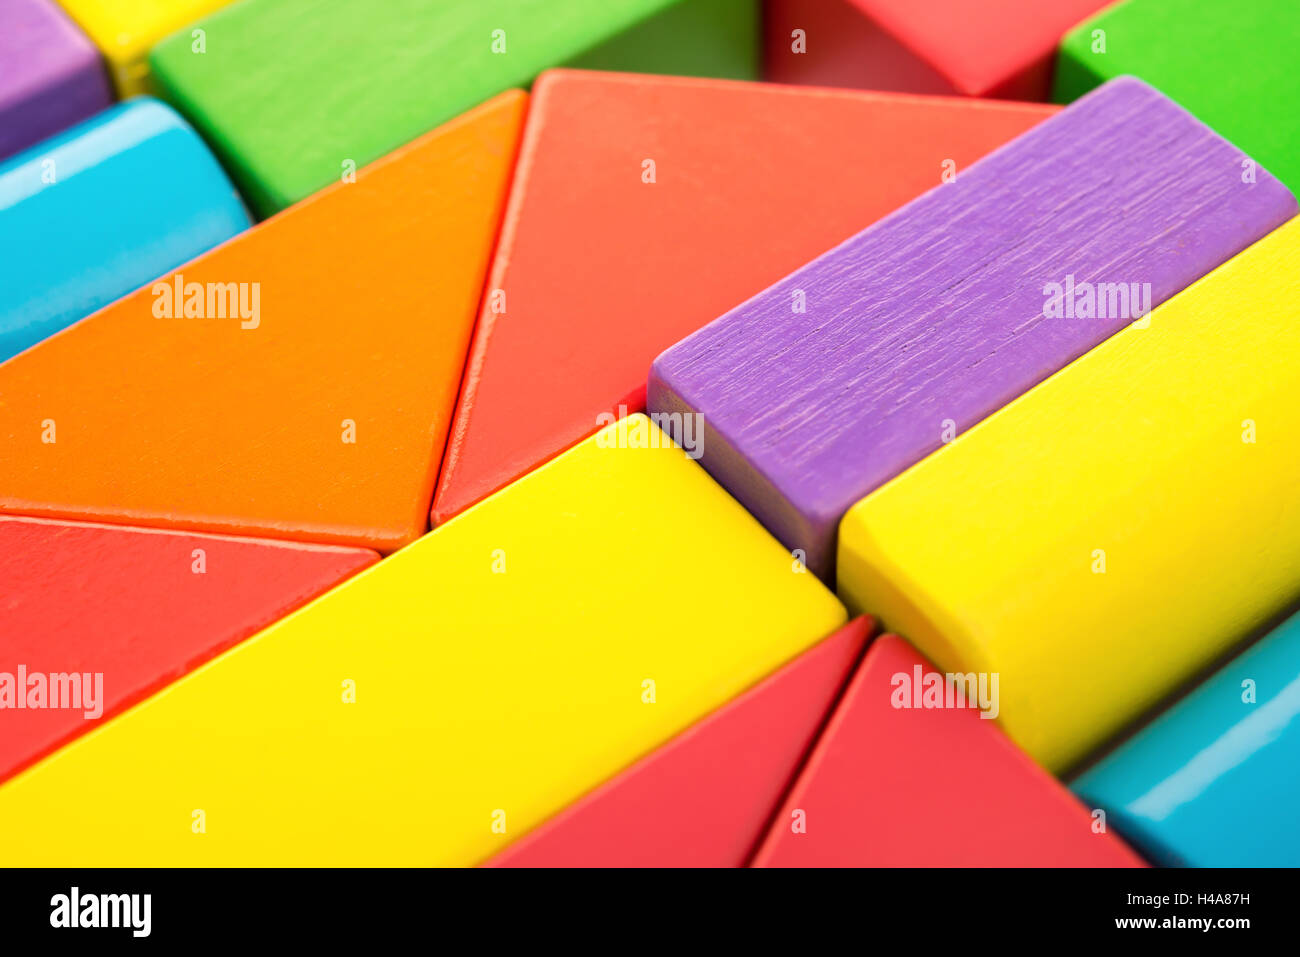 different color and shape wooden toy blocks Stock Photo